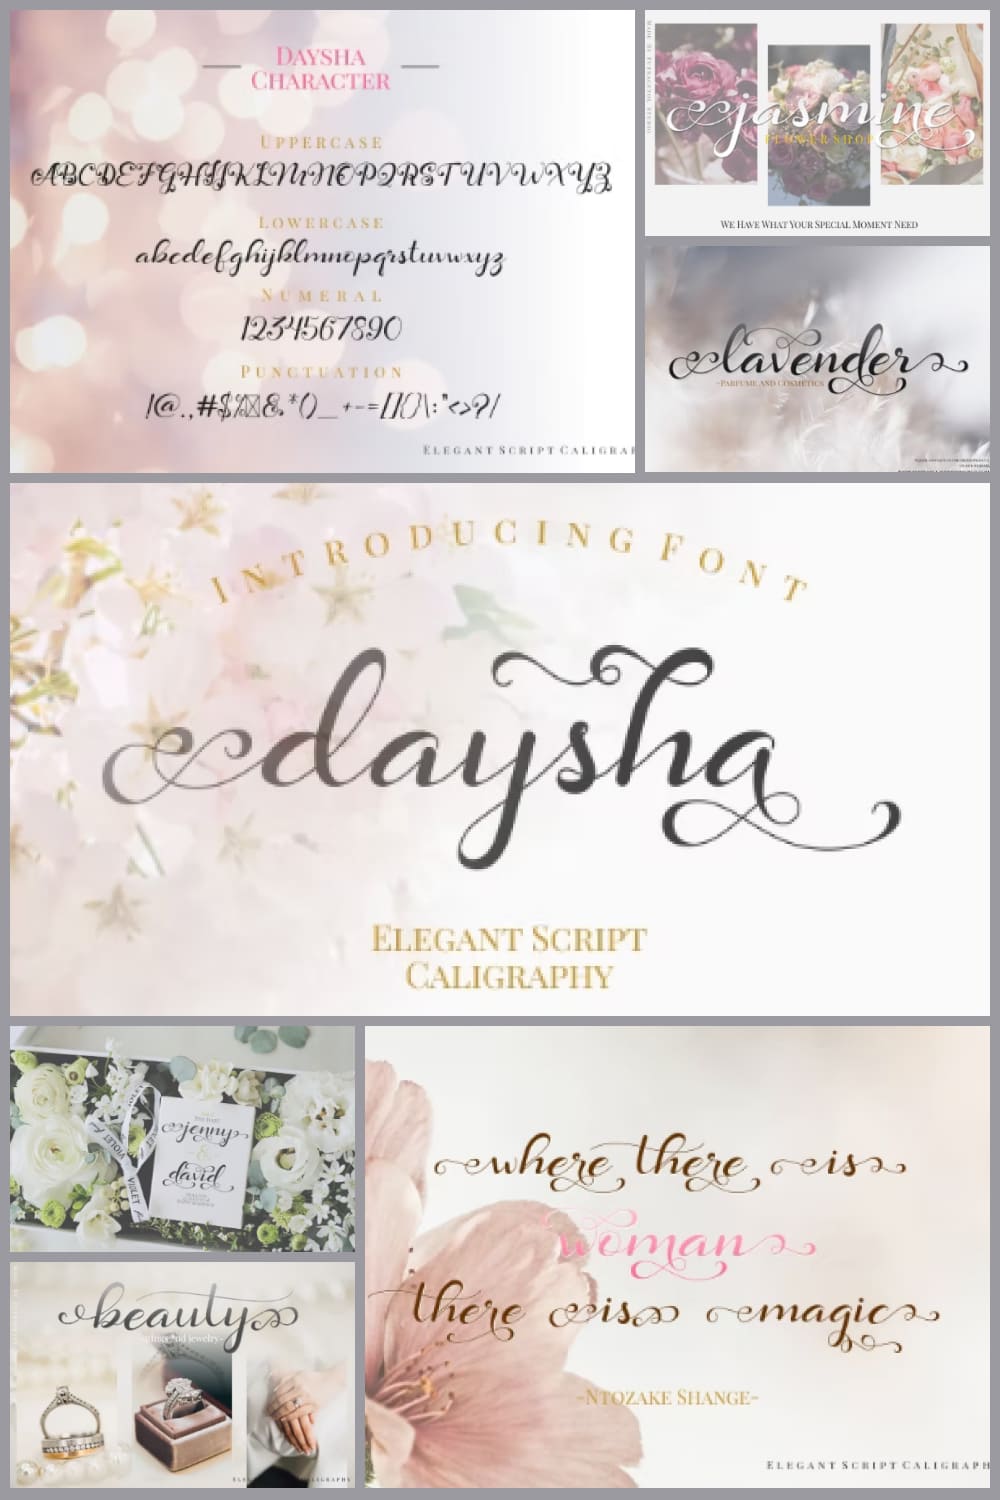 Collage with images with calligraphic wedding font.